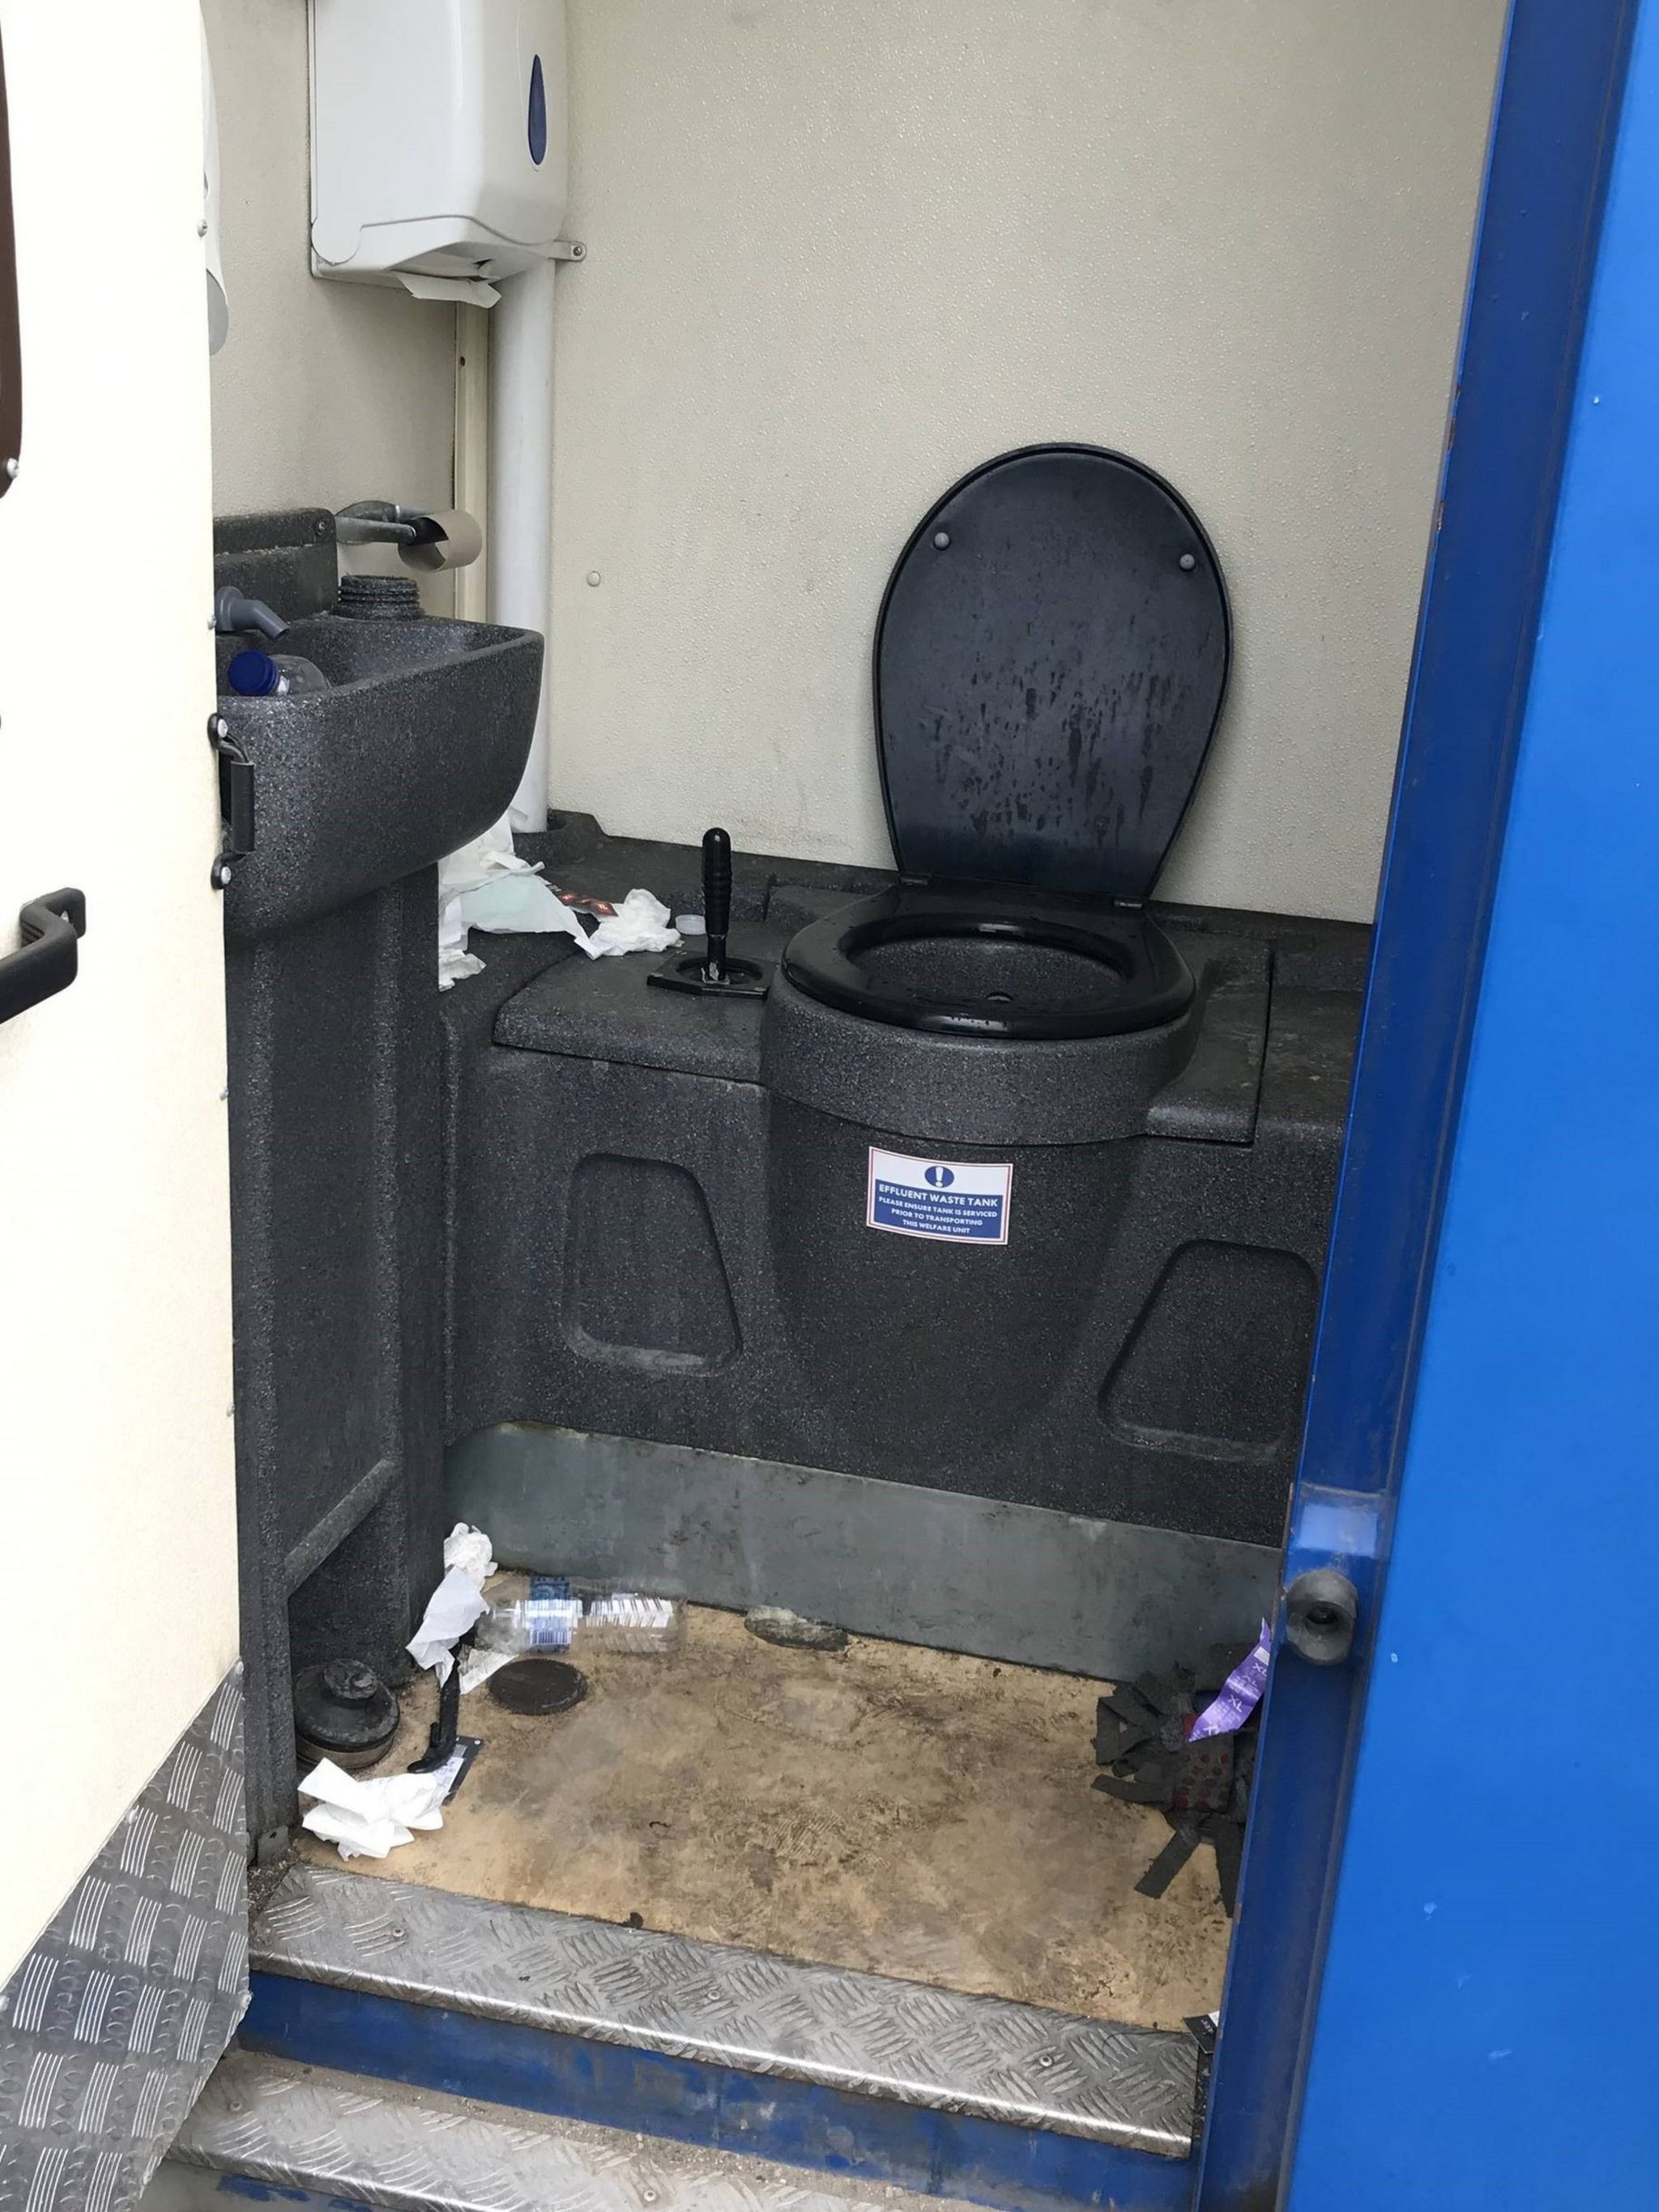 A dirty toilet at the Dover container